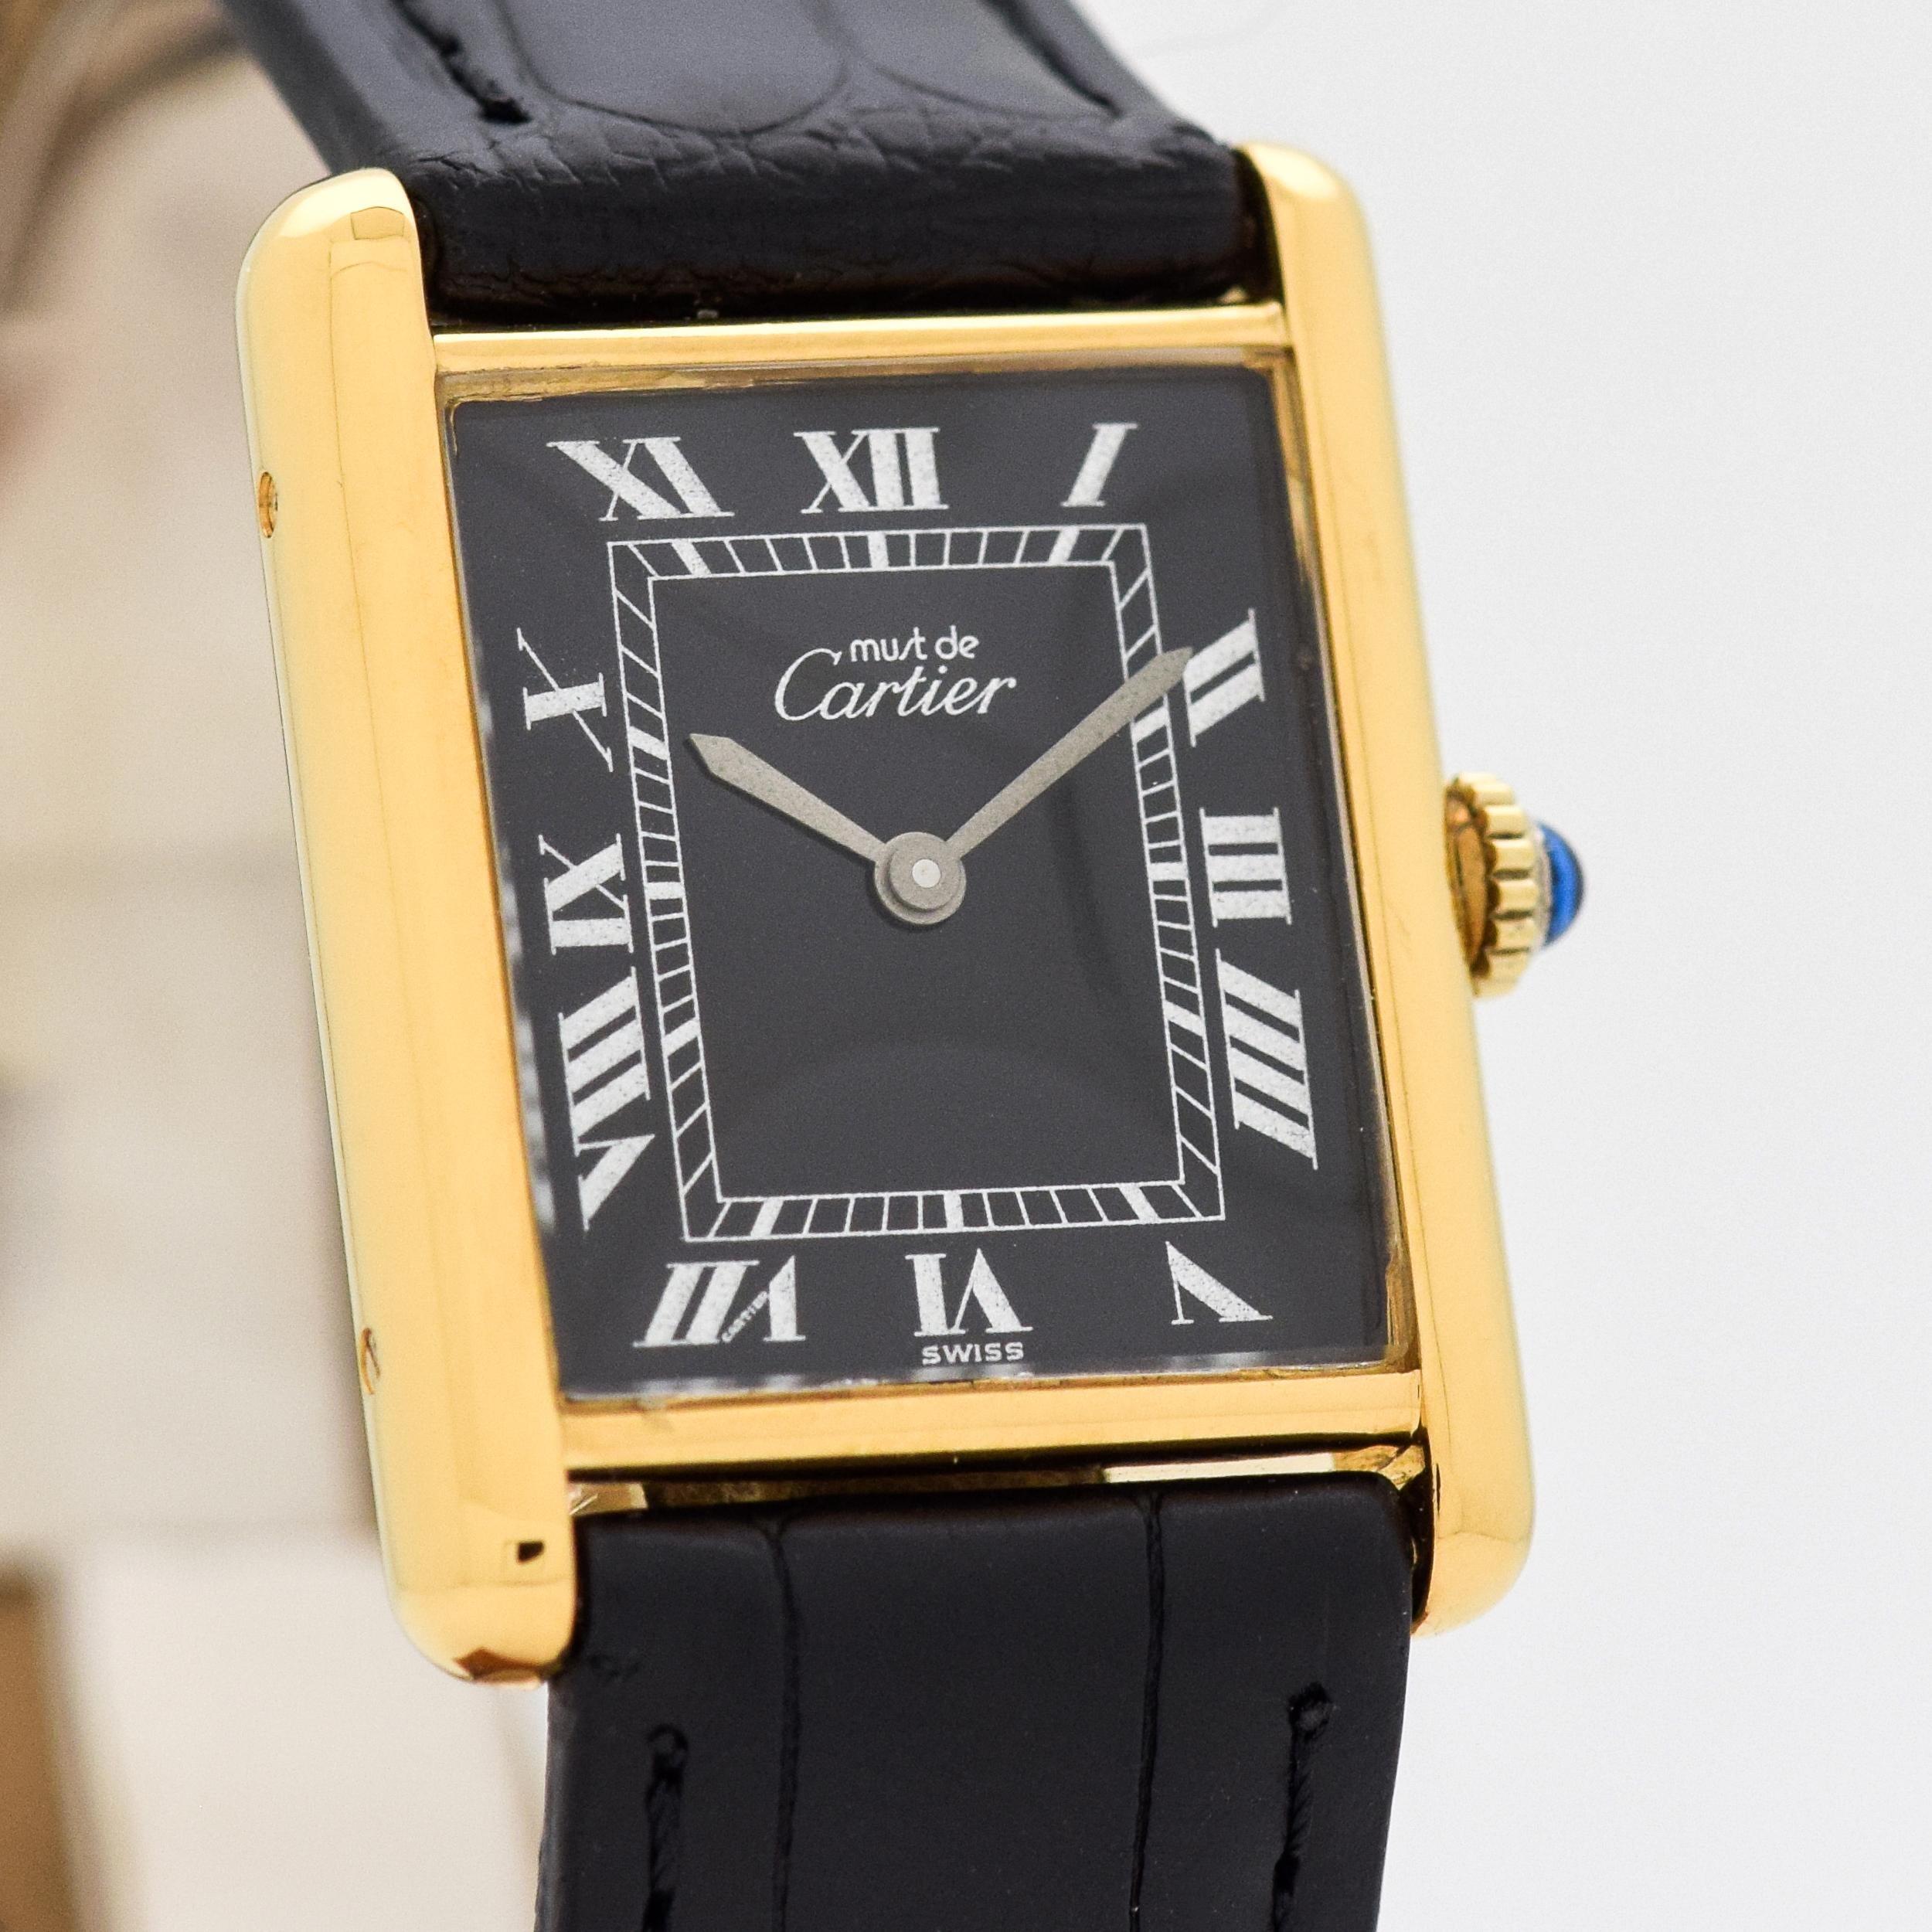 1990's Vintage Cartier Standard Men's Size Tank 18k Yellow Gold Plated Over Sterling Manual Wind watch with Original Black Dial with Silver Roman Numerals. Triple Signed. 23mm x 30mm lug to lug (0.91 in. x 1.18 in.) 17 jewel, manual-wind ETA